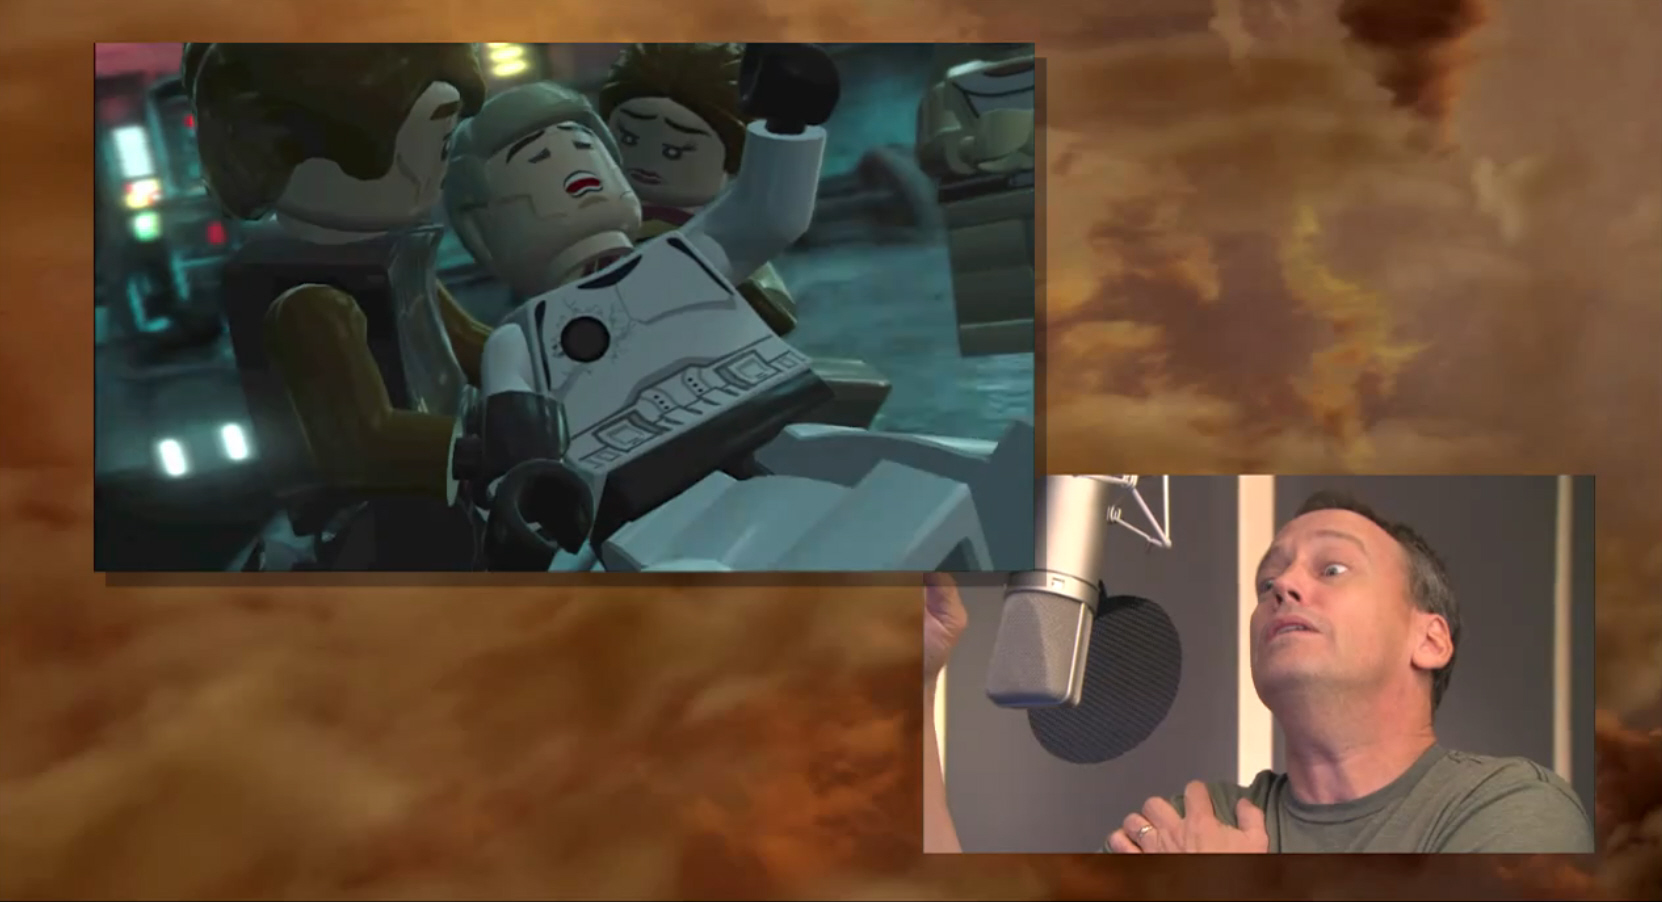 lego star wars 3 character codes